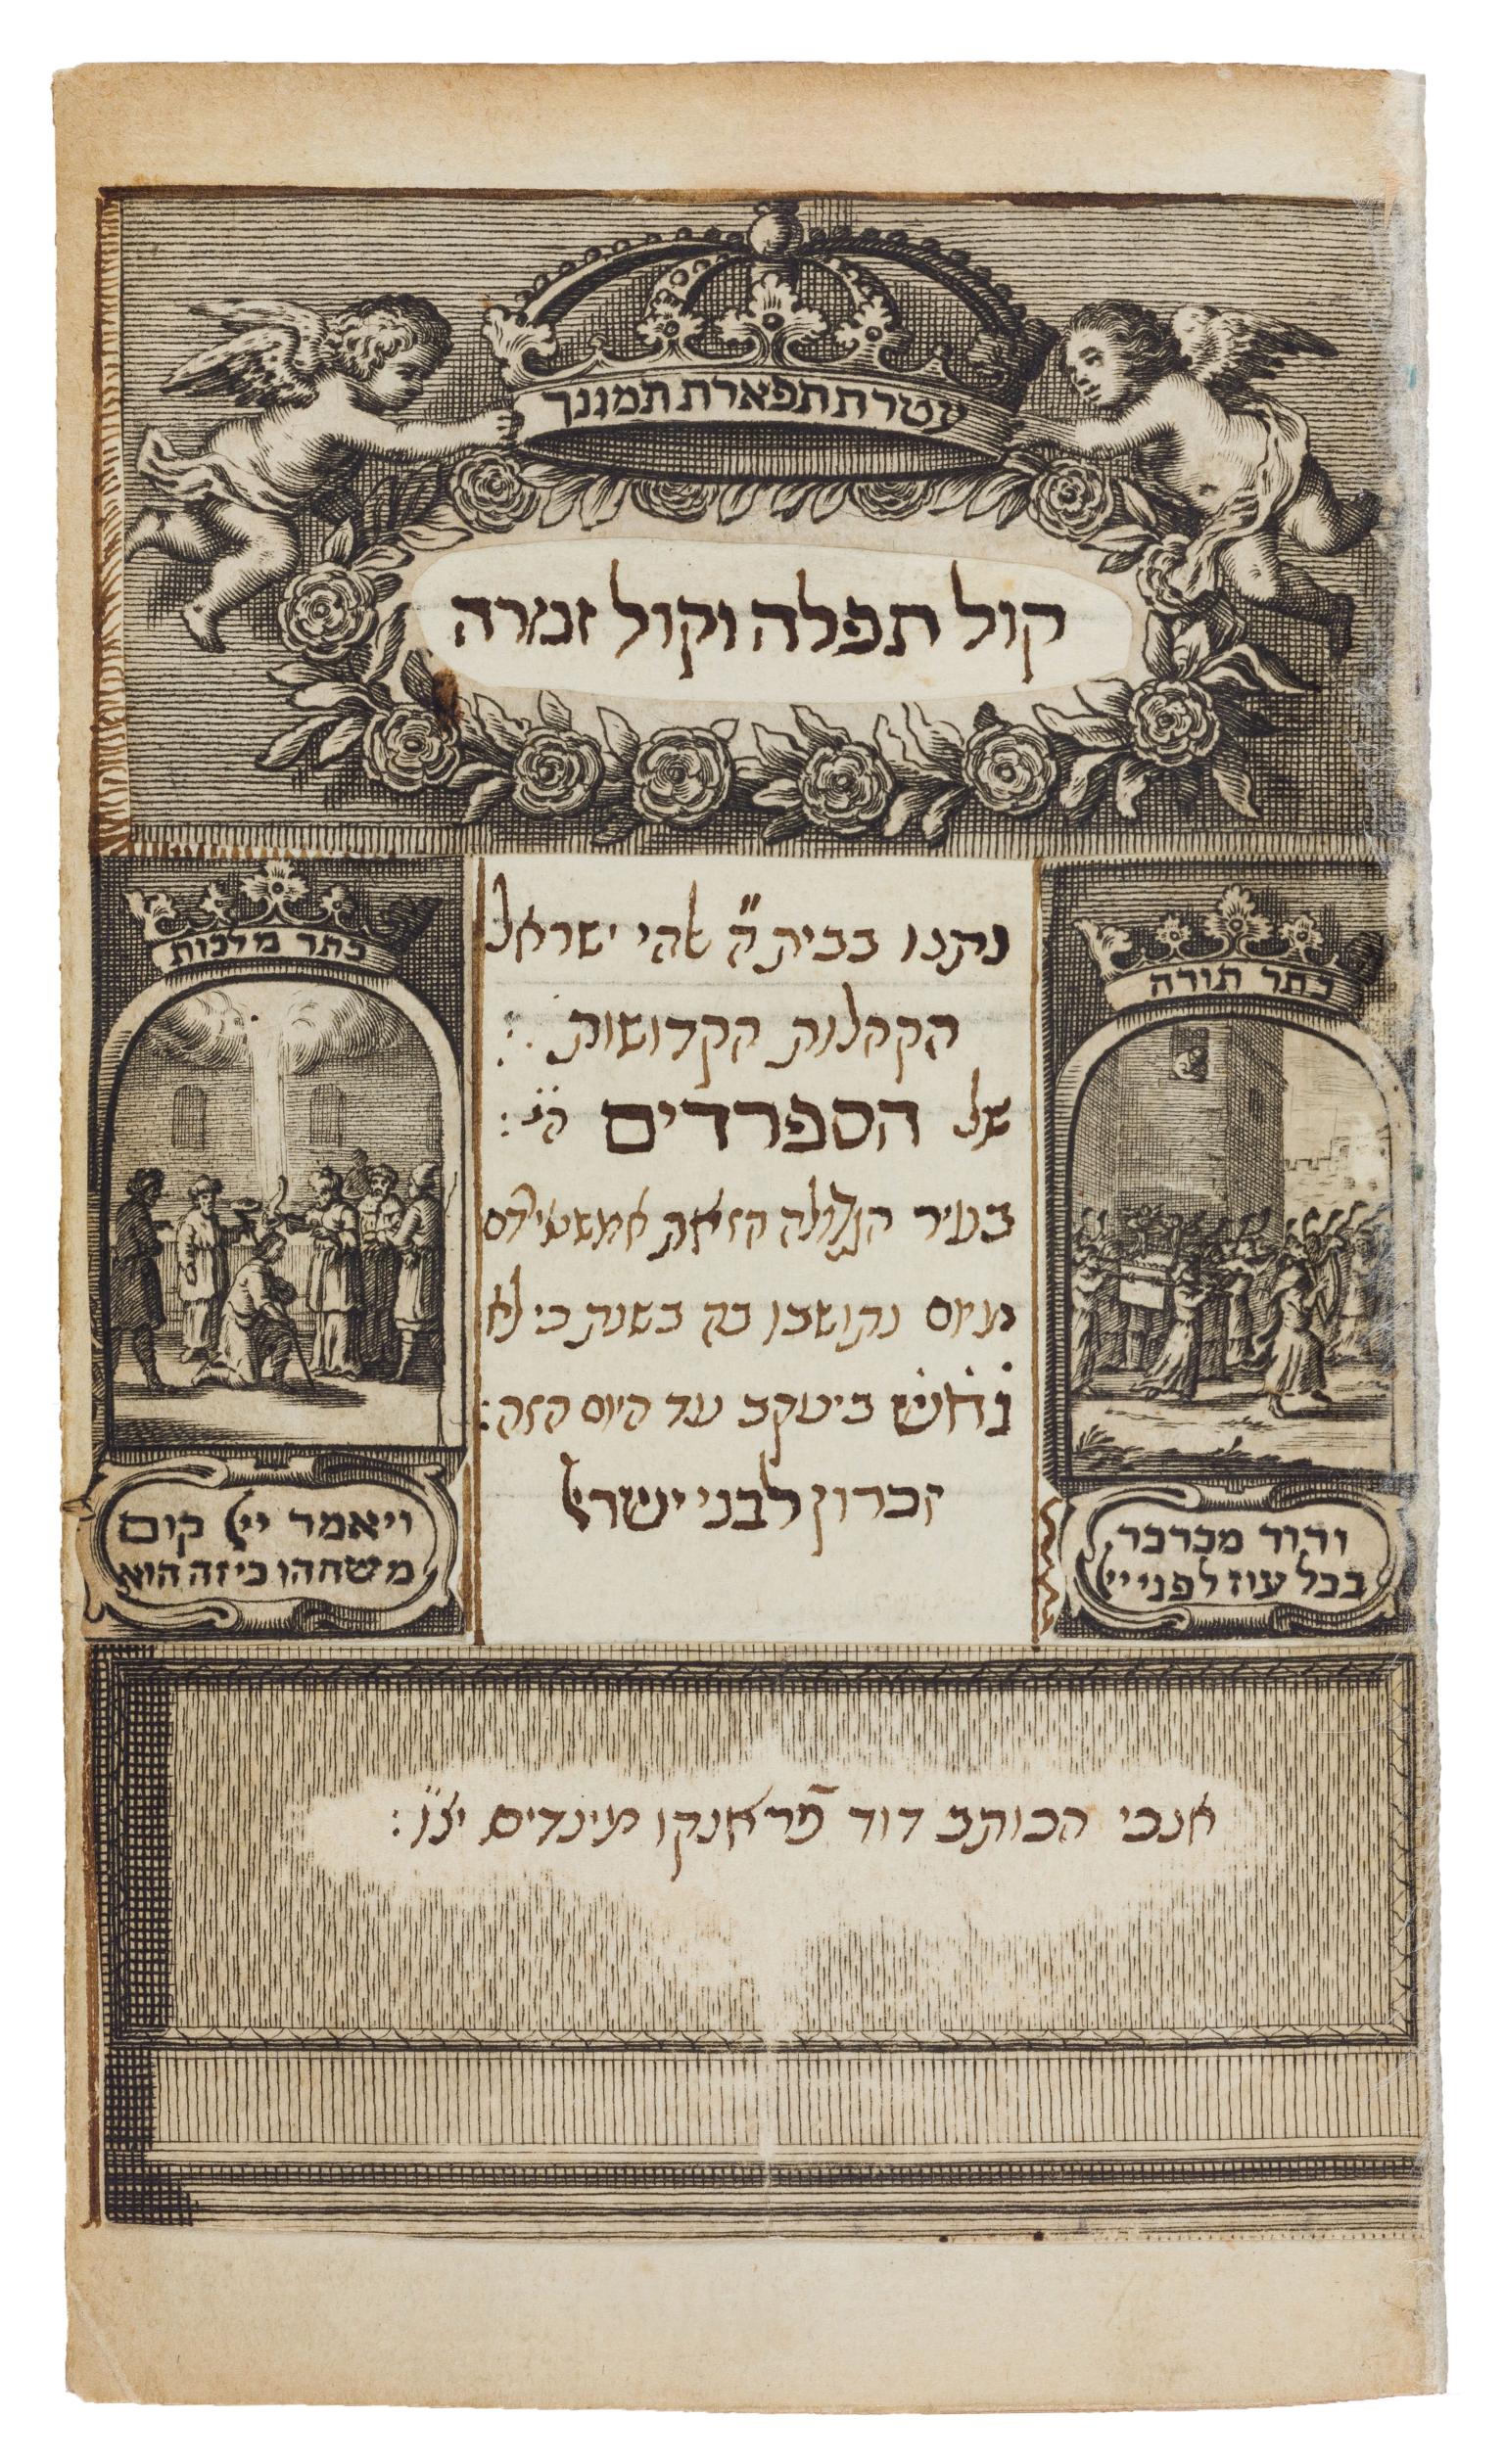 Page with Hebrew title surrounded by wreath and two cherubs, above middle section with two columns with small pictures and Hebrew text in center, and Hebrew line at bottom of page. 